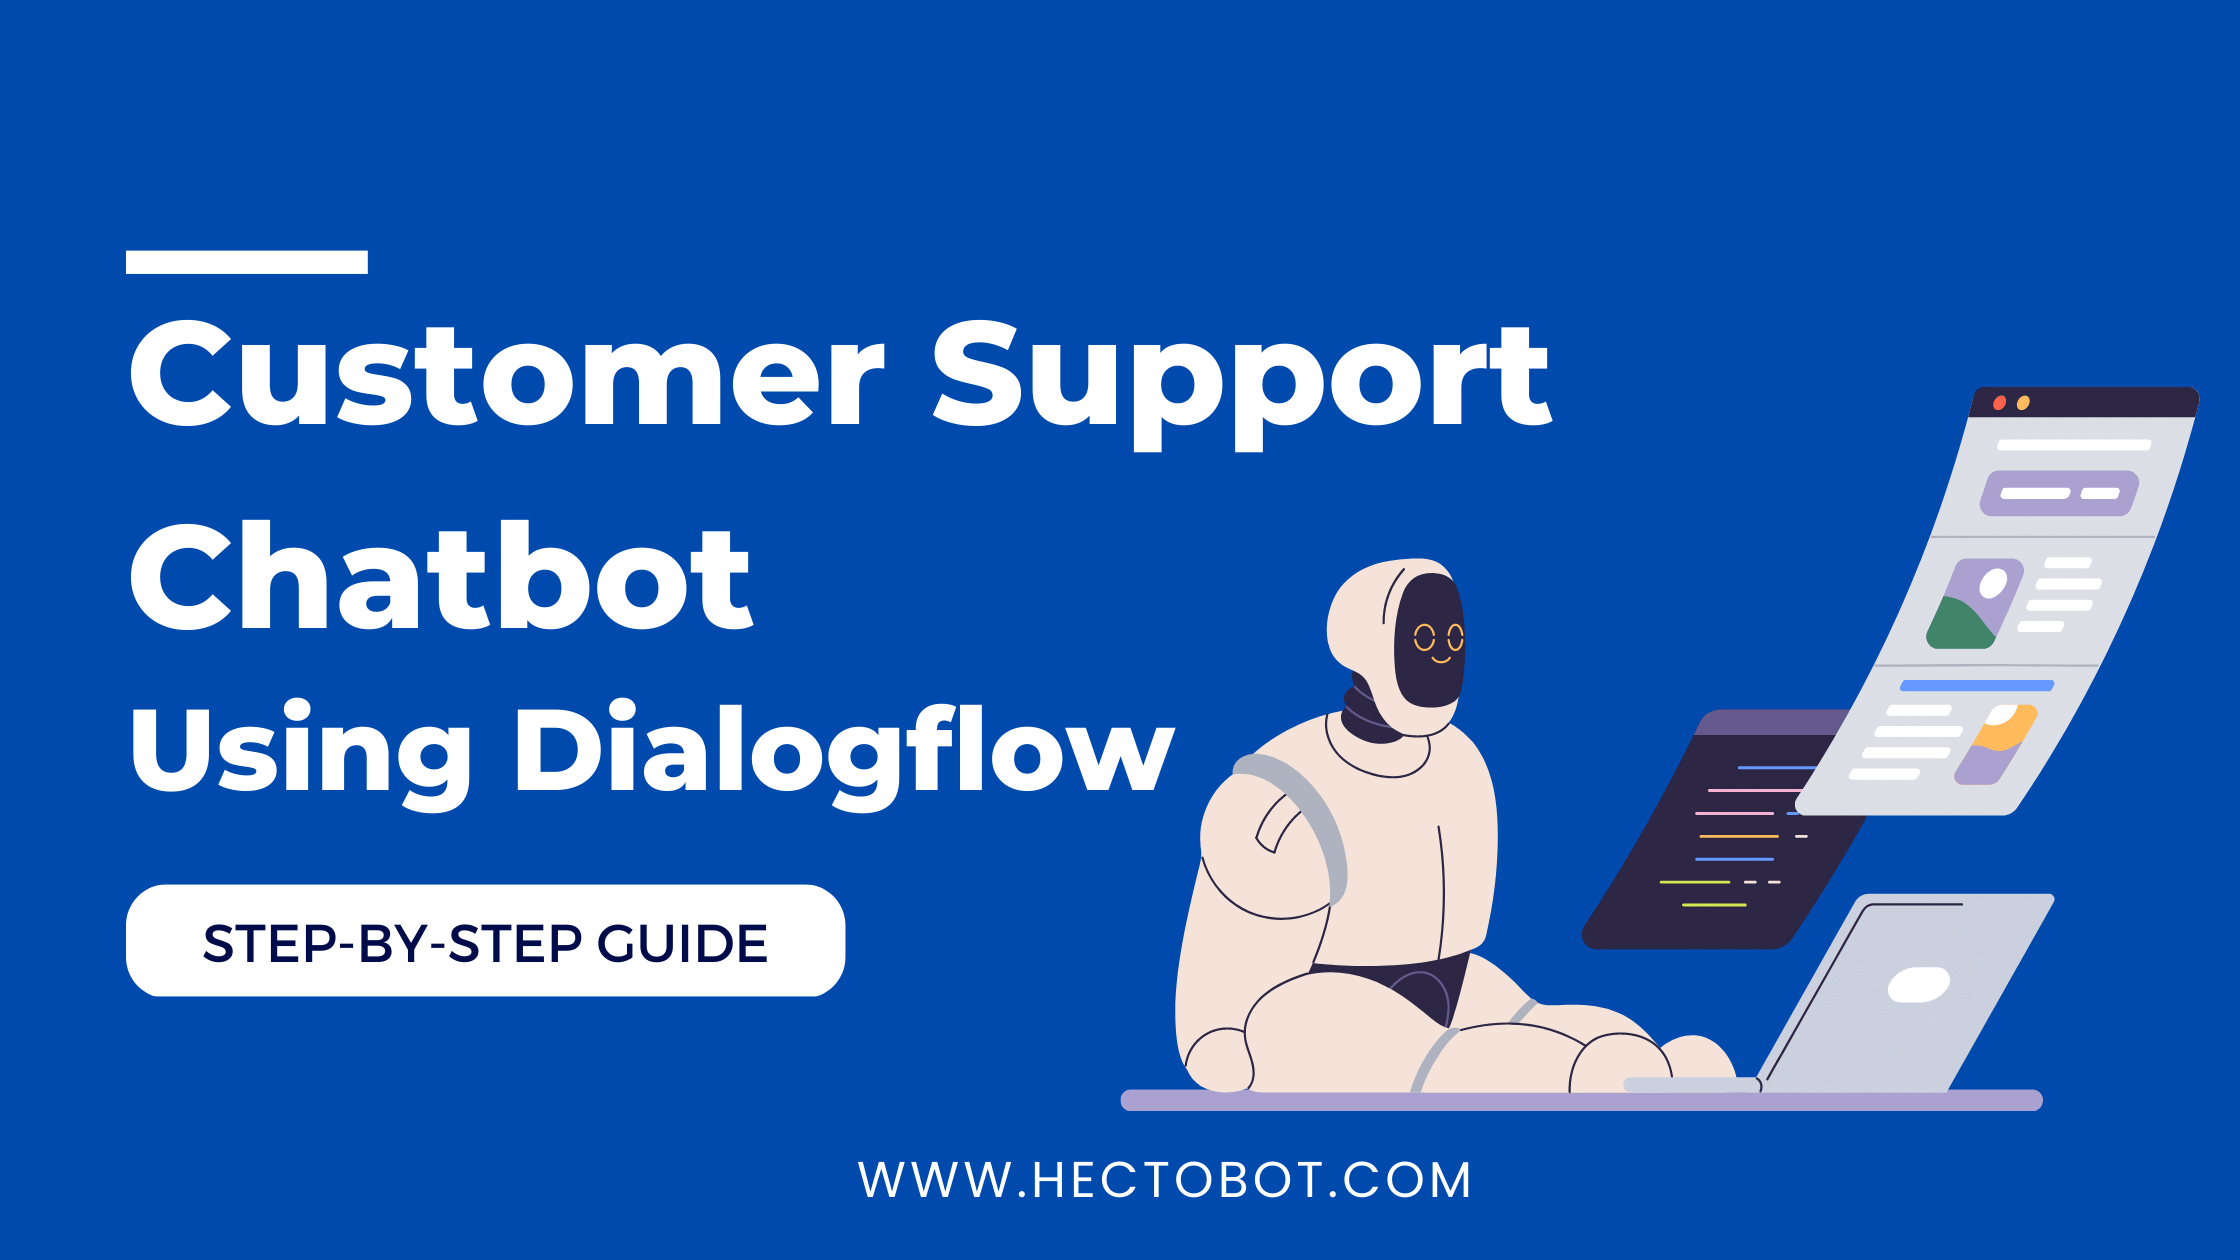 Customer Support Chatbot Using Dialogflow: Step-by-Step Guide - HectoBot